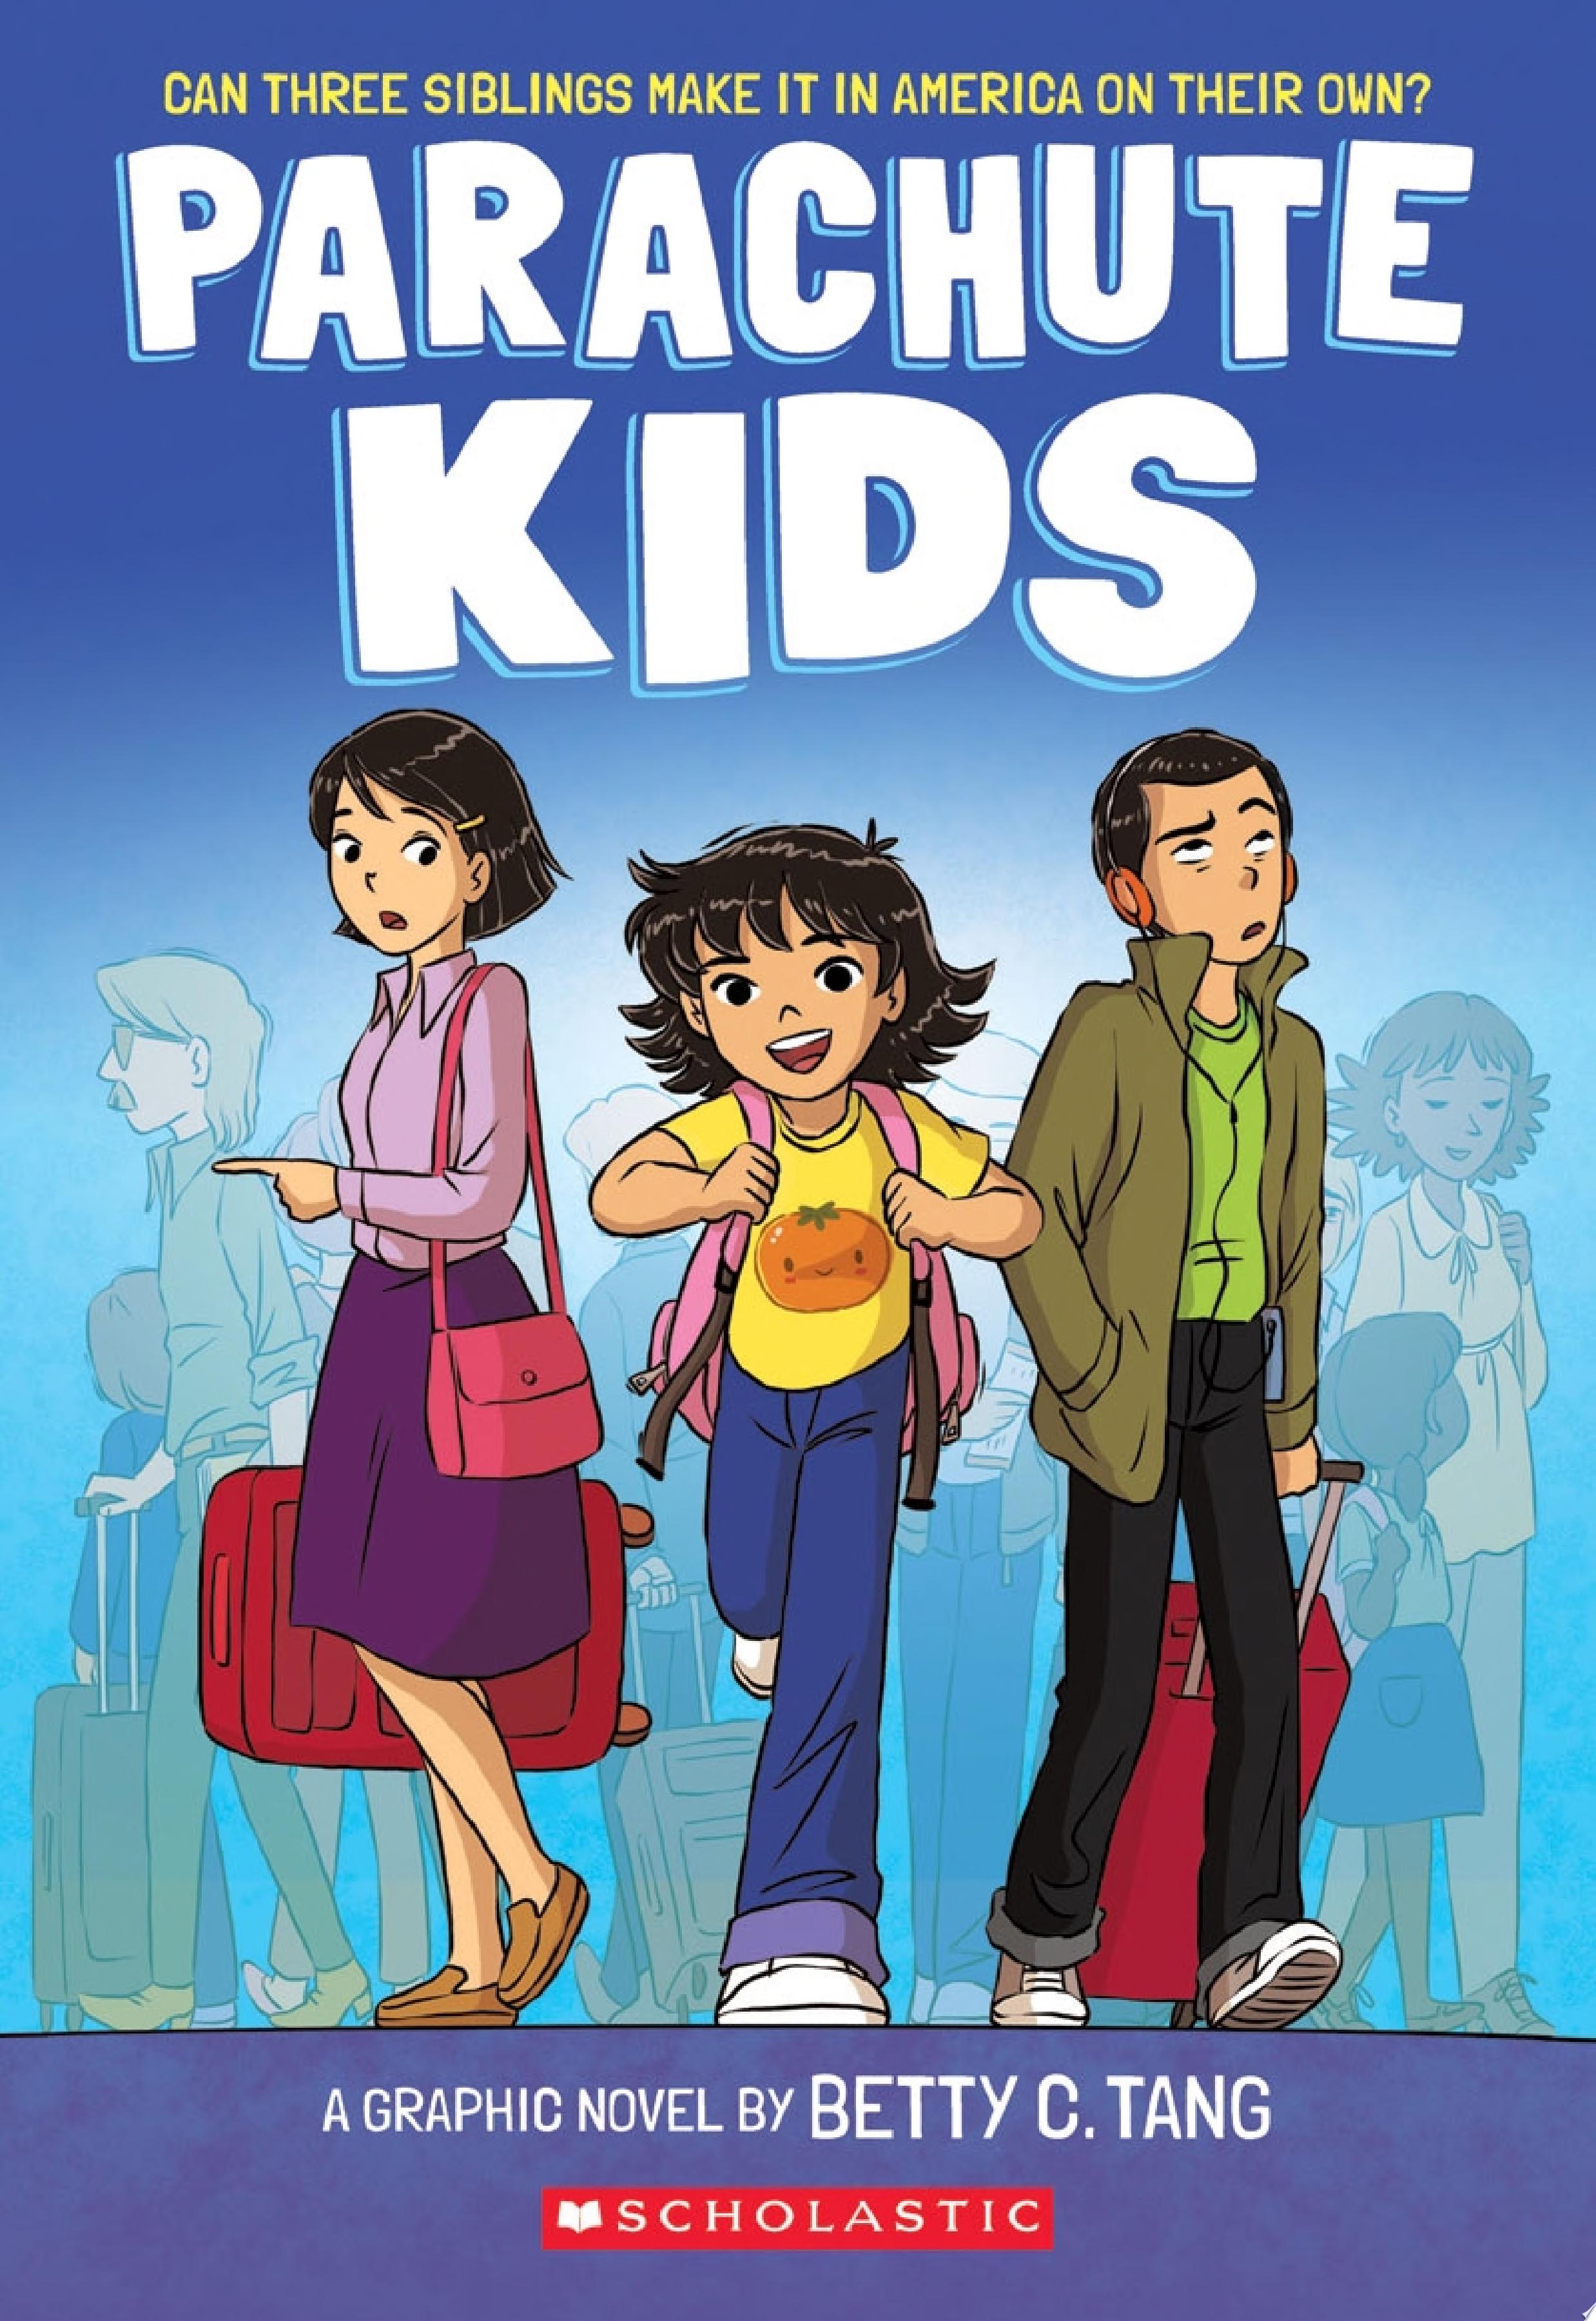 Image for "Parachute Kids: A Graphic Novel"